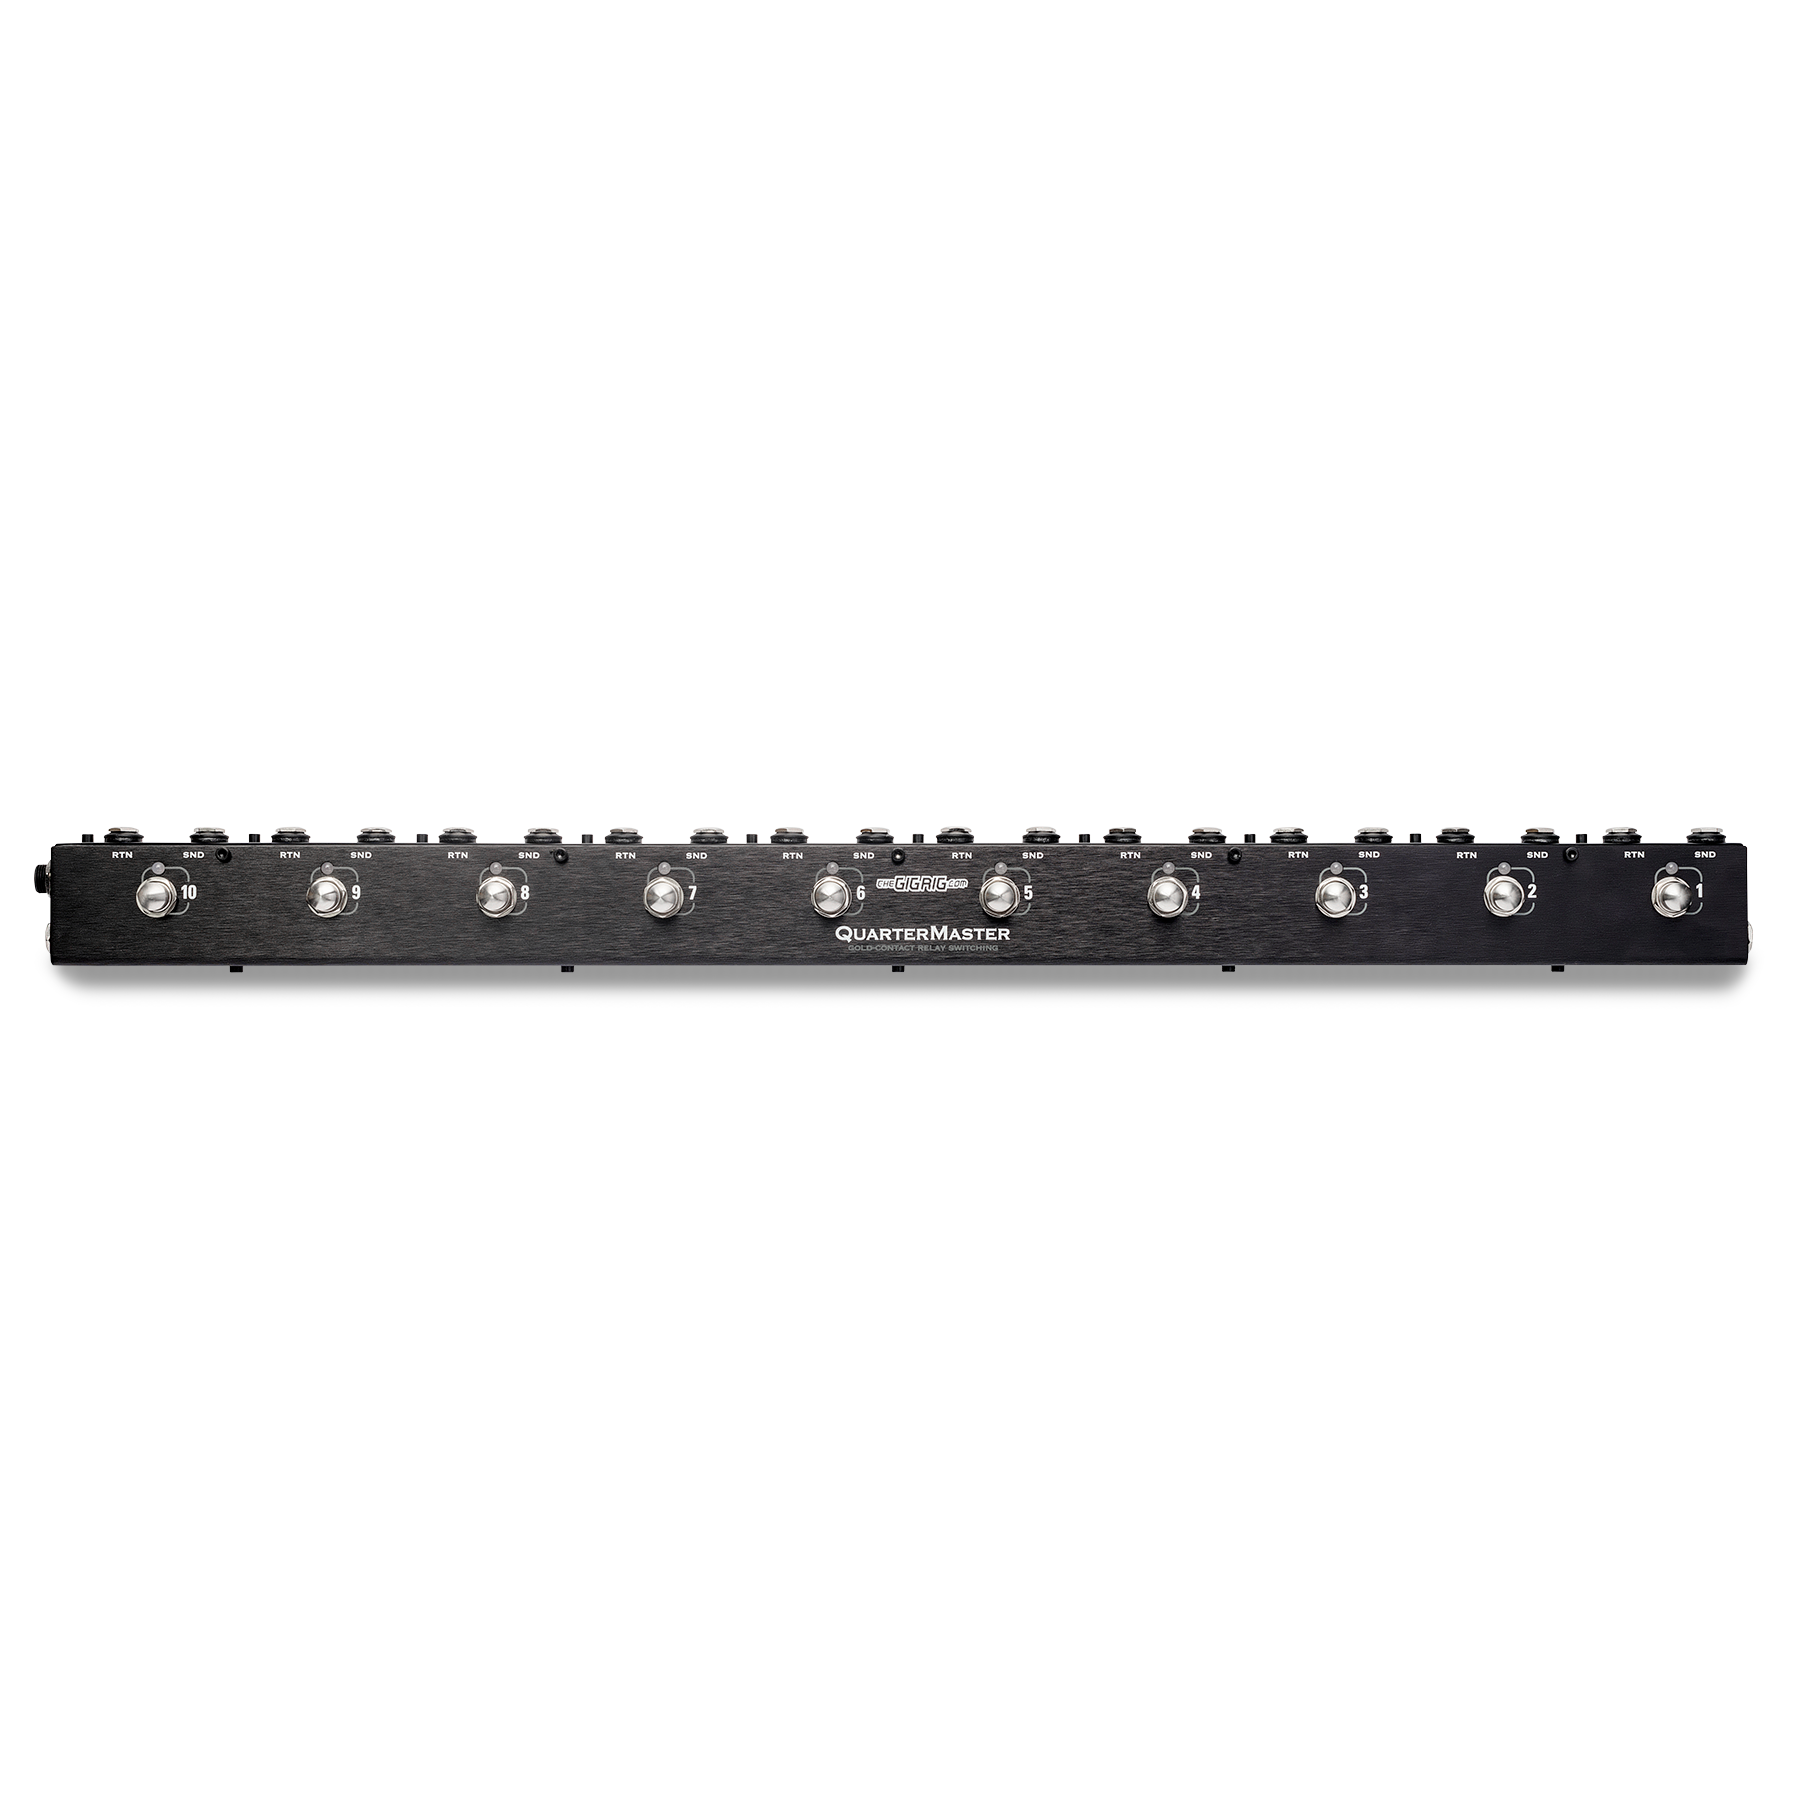 The GigRig Quartermaster QMX10 Loop Switcher for Guitar Effects Pedals